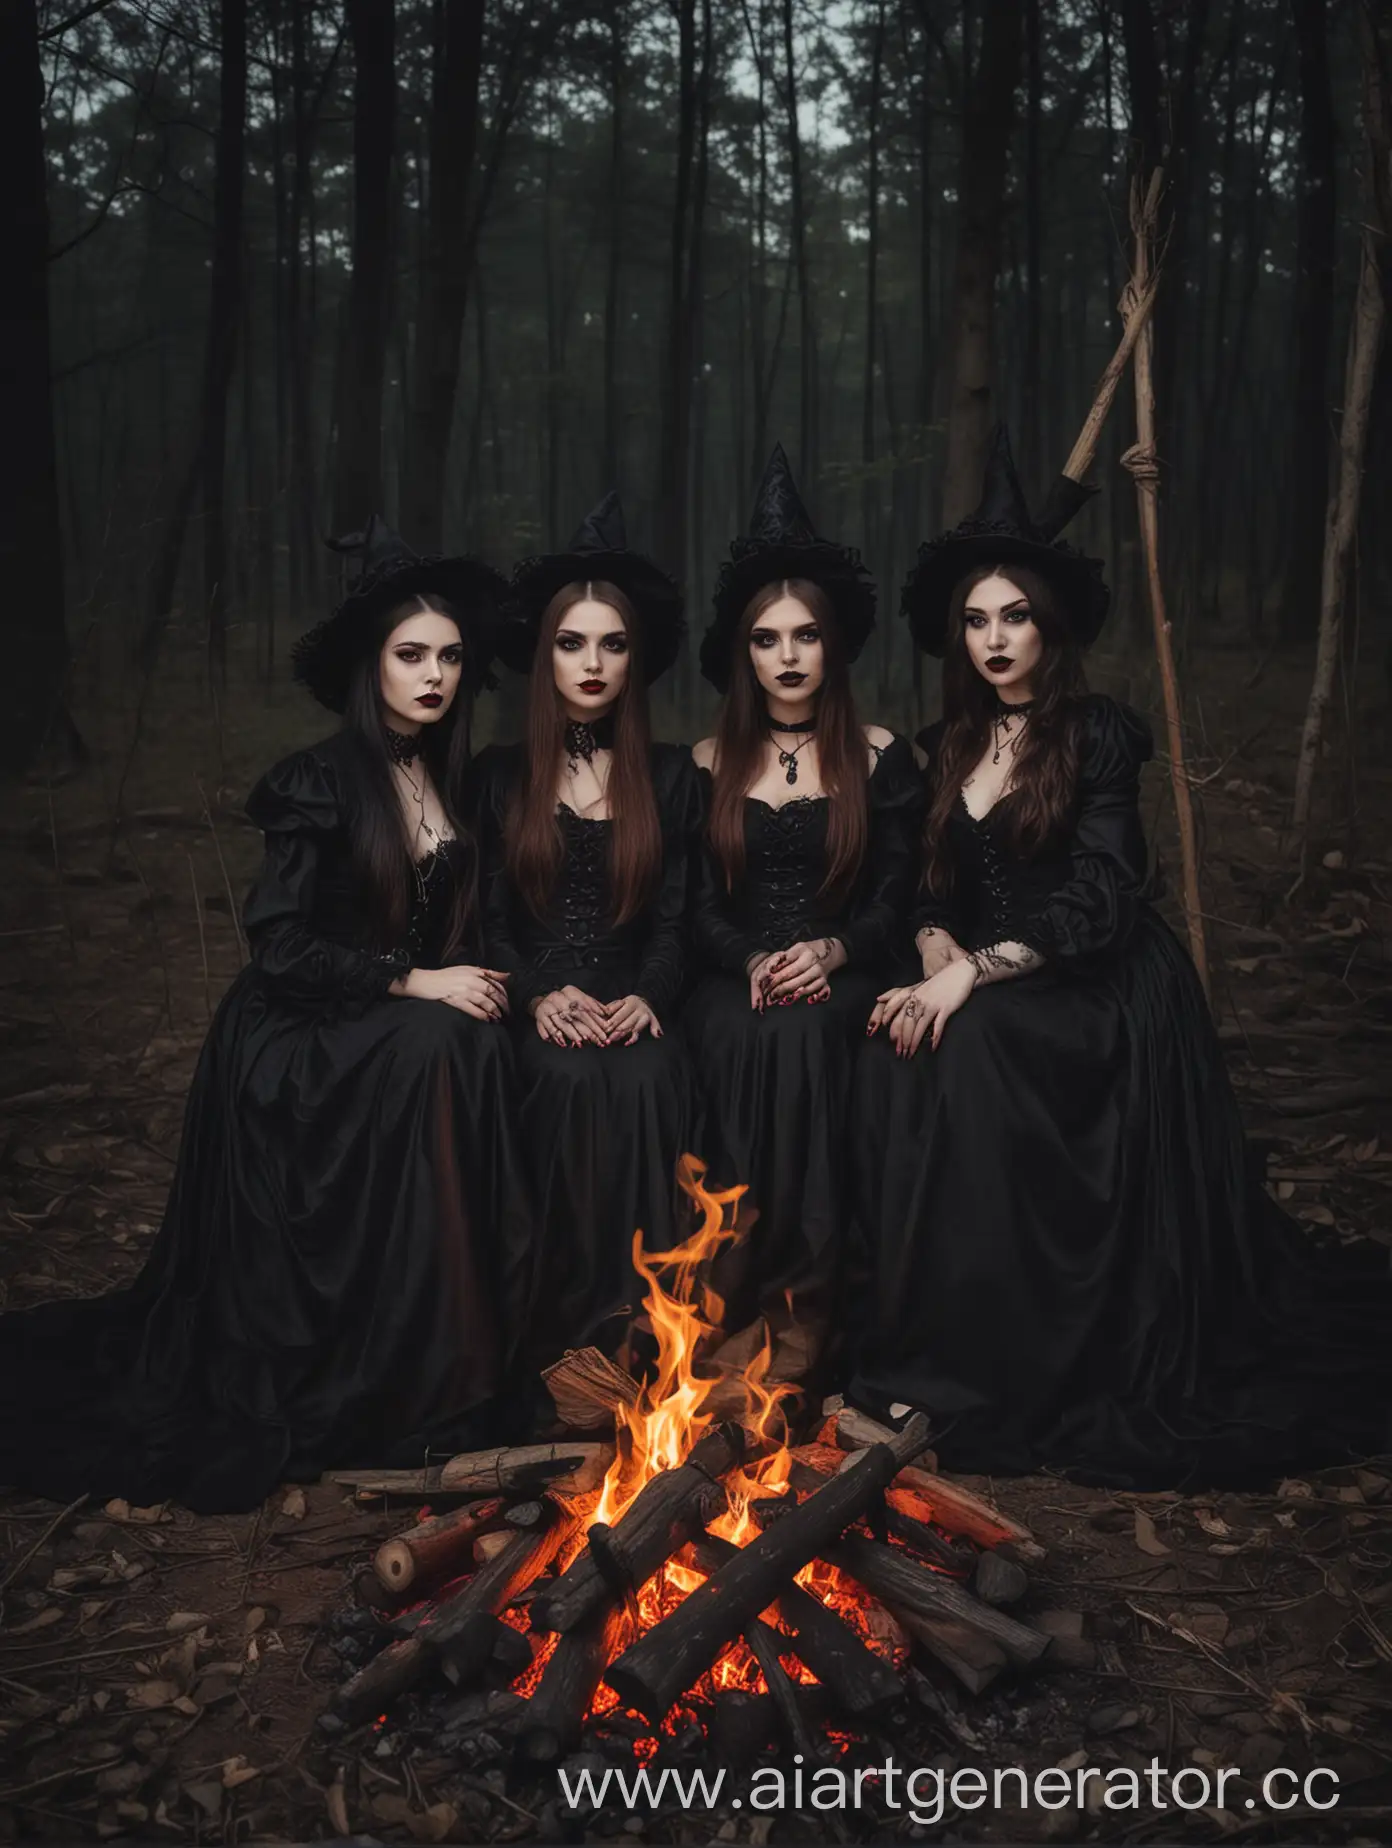  Four Beautiful gothic girls dressed as witches and demonesses sitting around the fire in the forest, beautiful darkness 